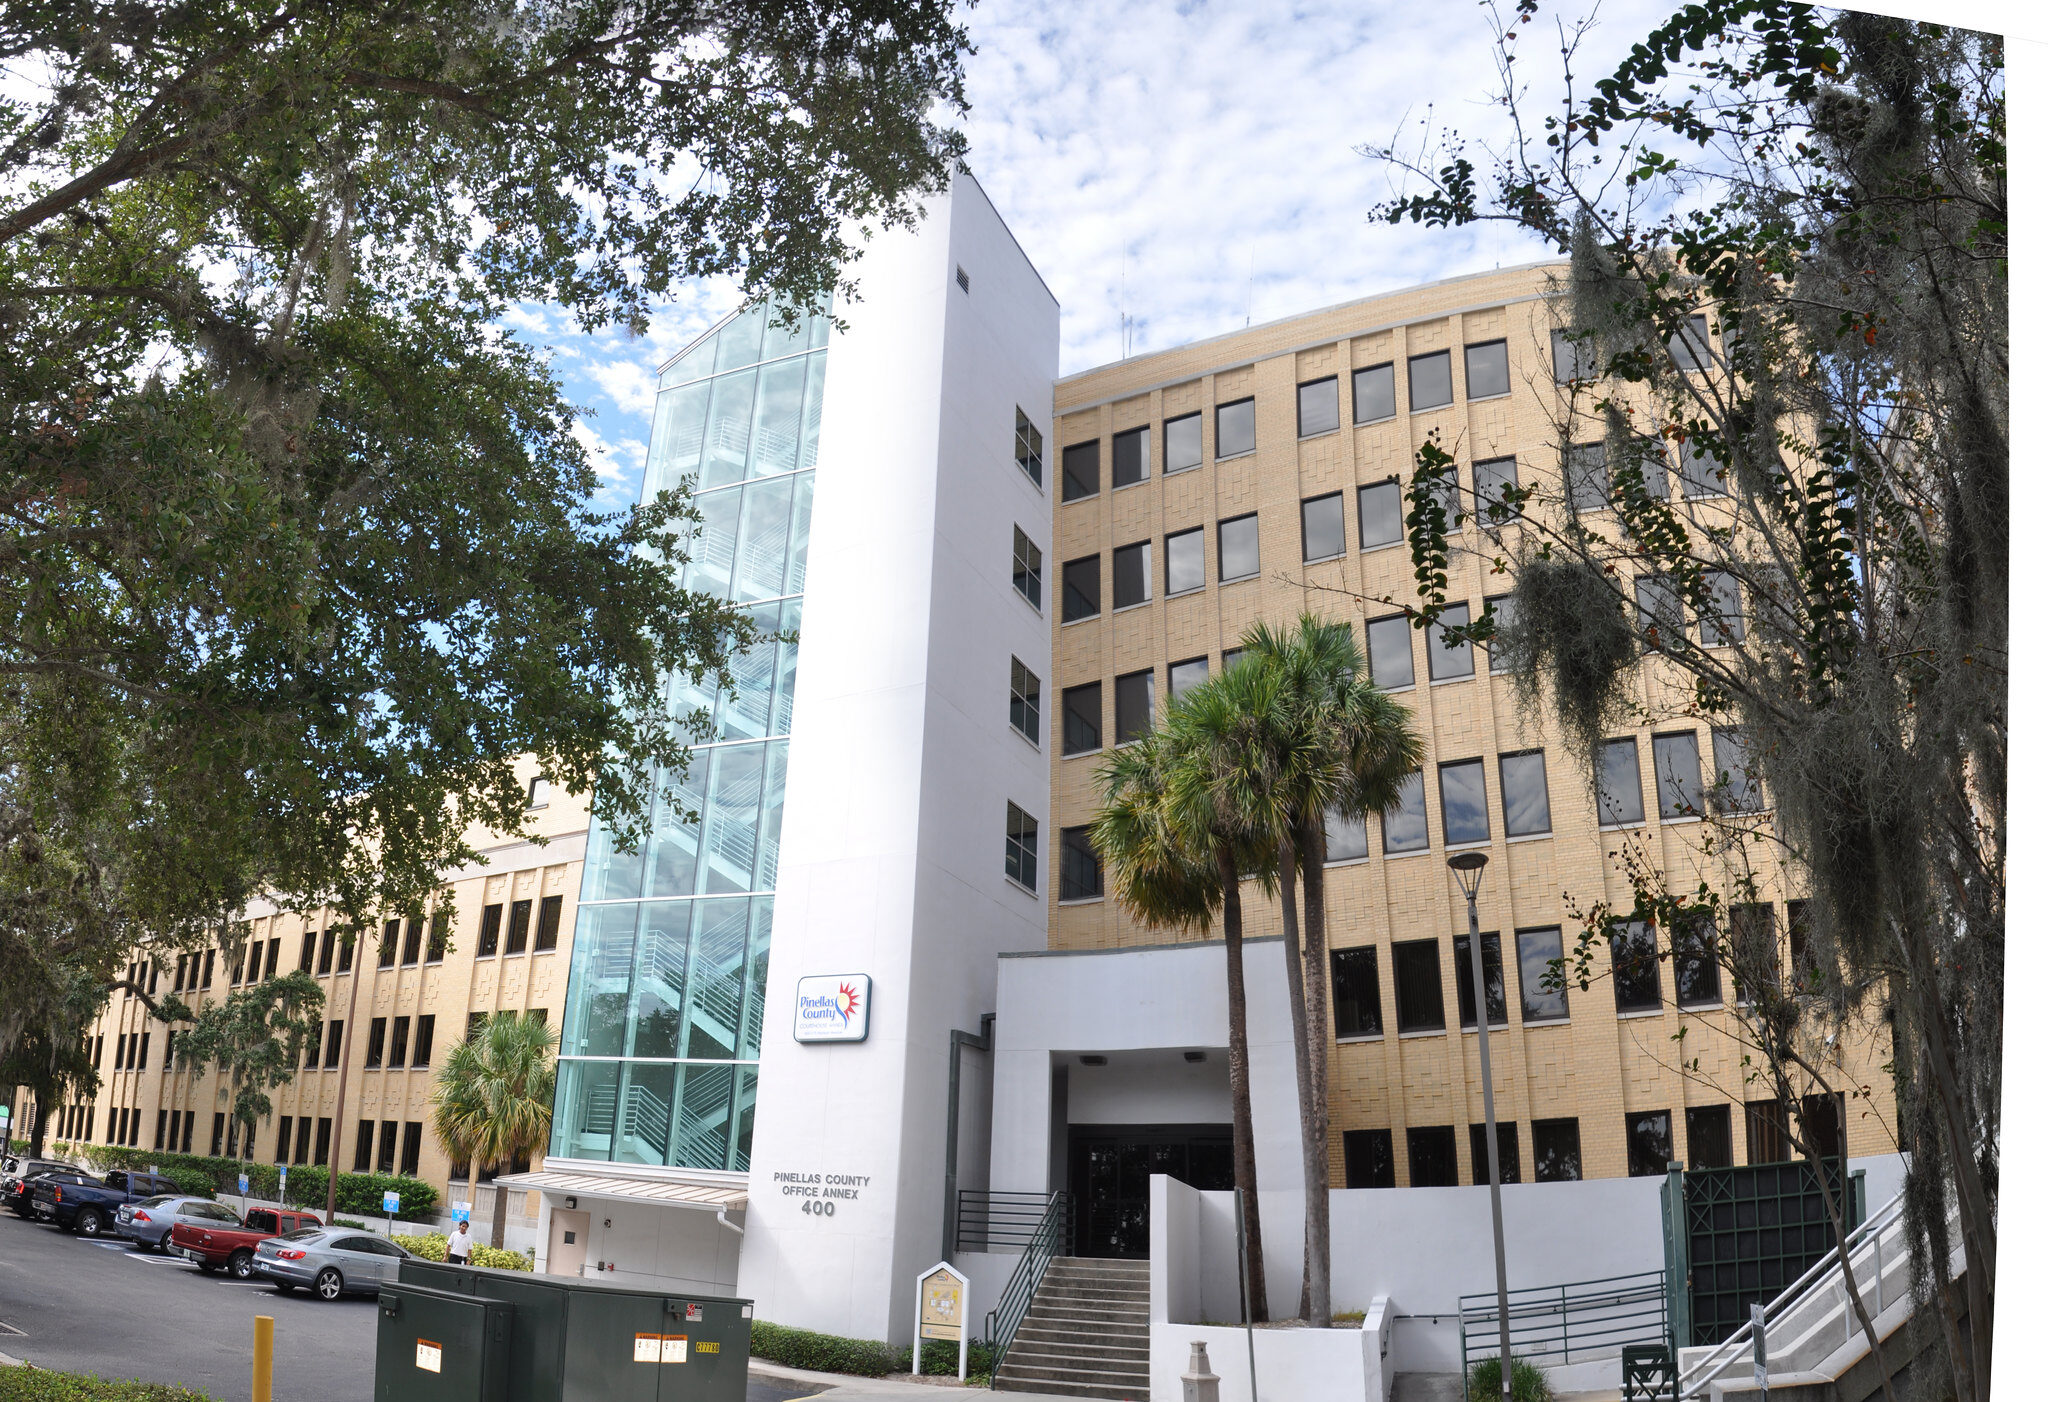 Human Resources Building in Clearwater